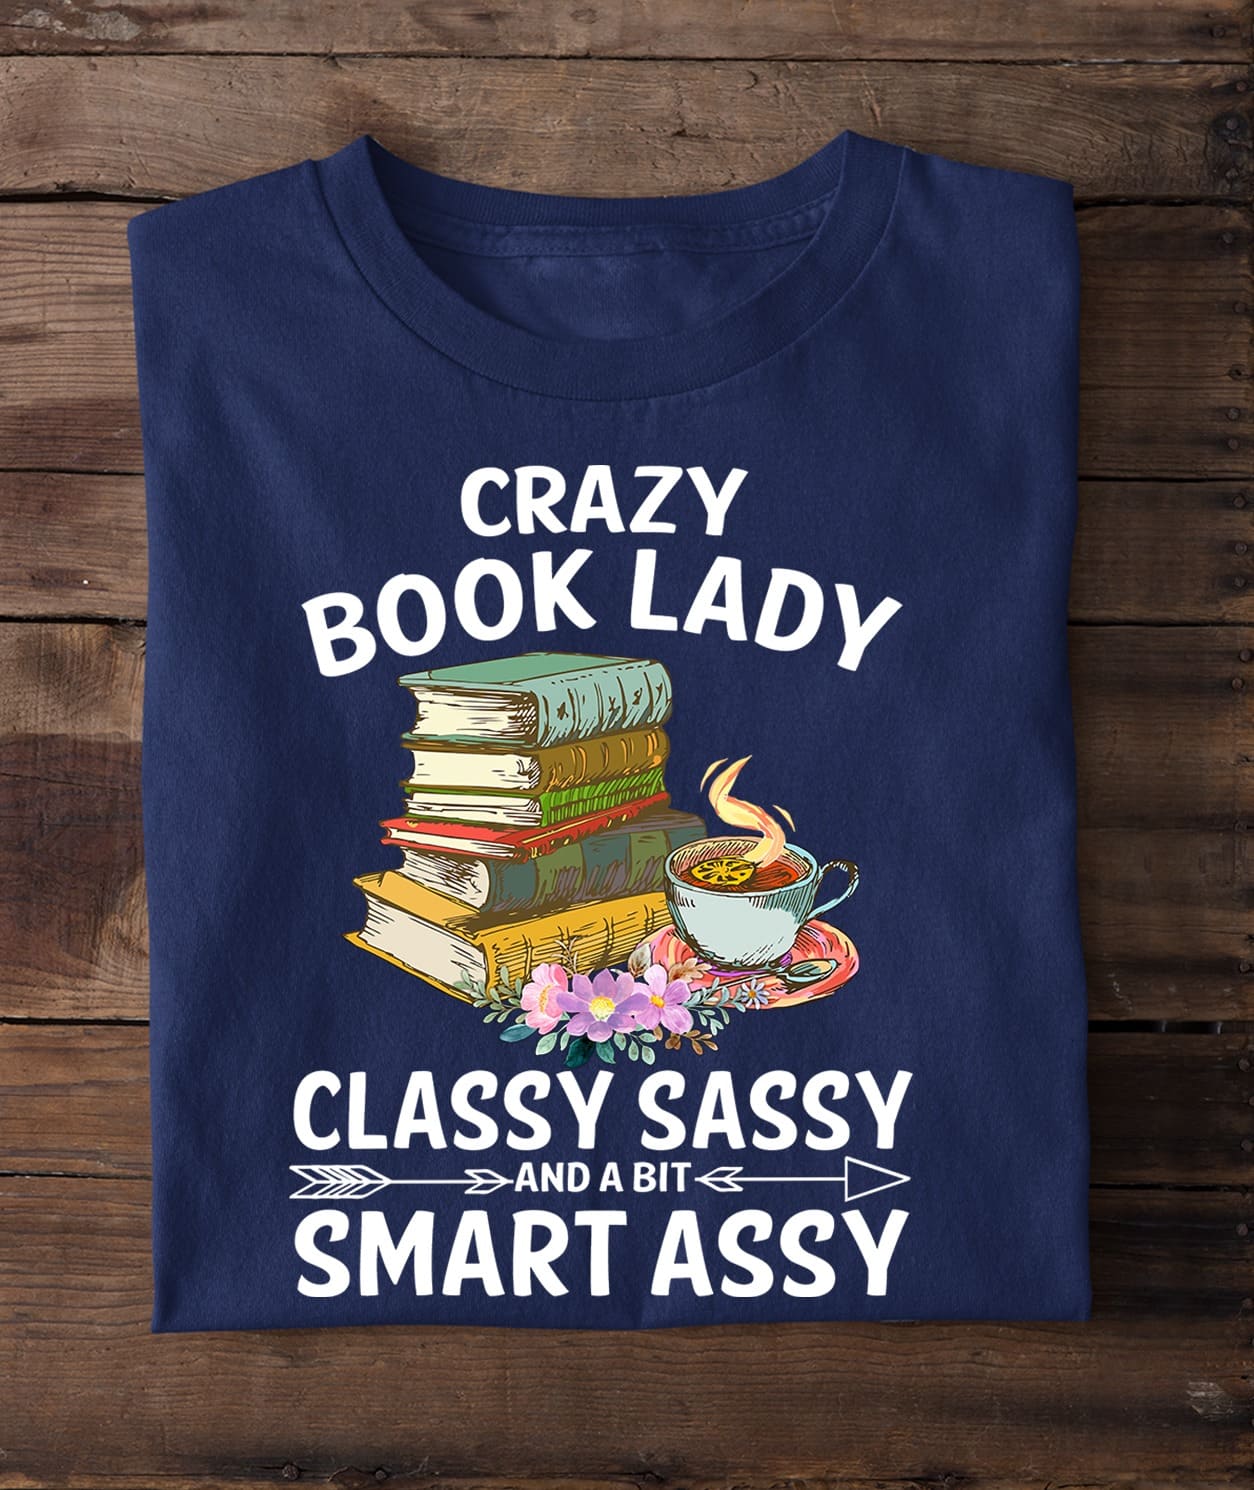 Crazy book lady - Classy sassy and smart assy, Book and tea, gift for book lady